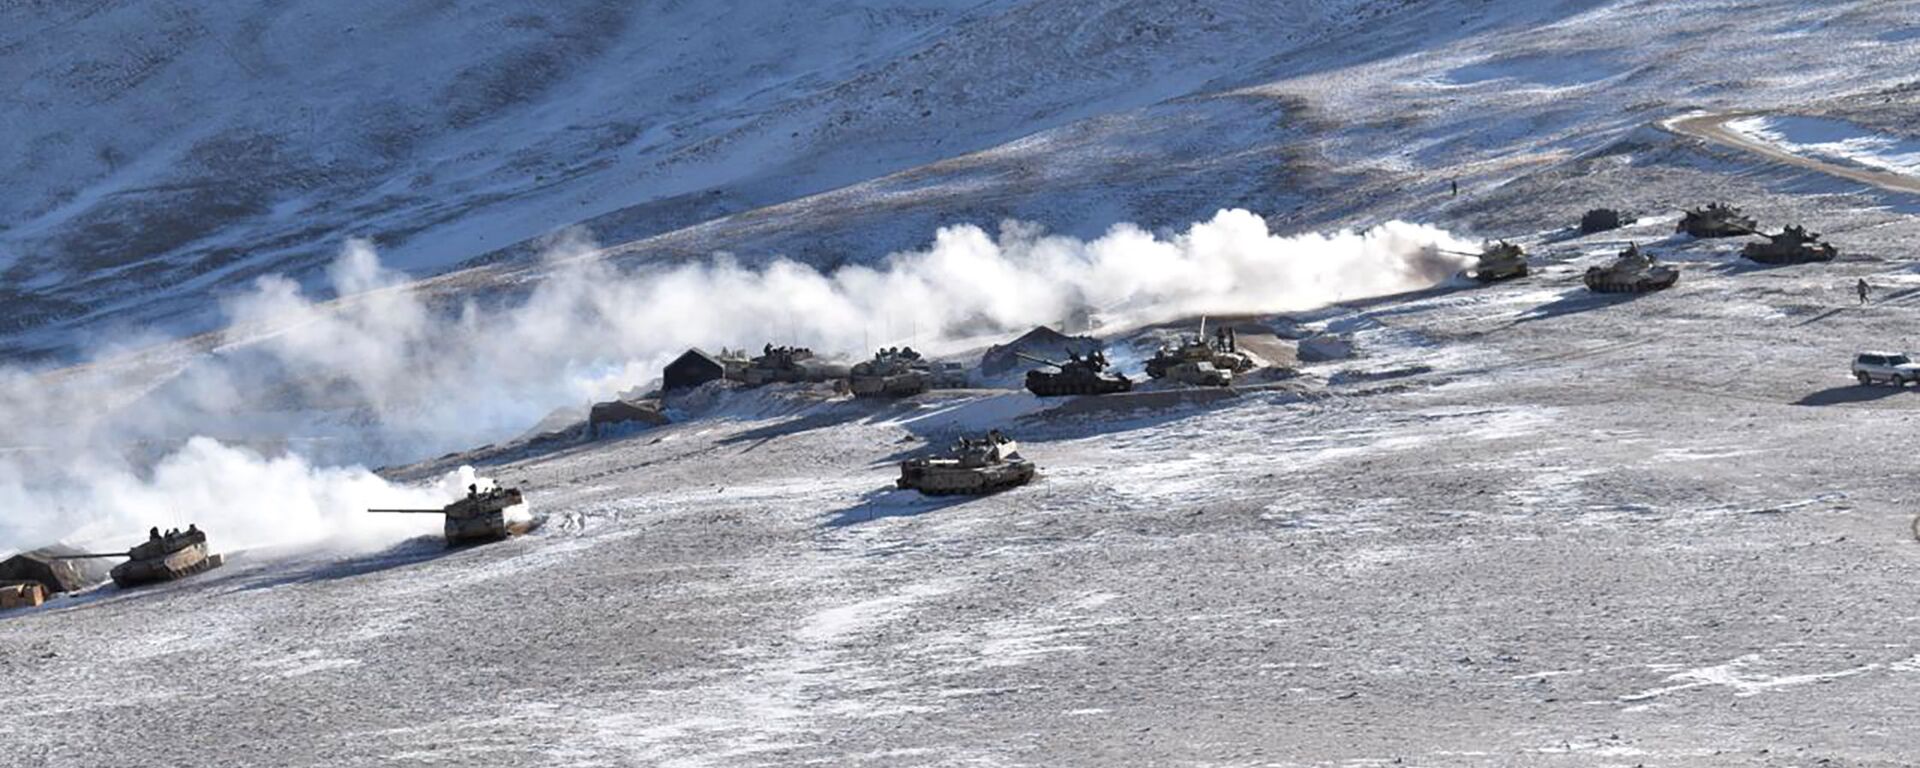 In this photograph provided by the Indian Army, tanks pull back from the banks of the Pangong Tso lake region, in Ladakh along the India-China border on Wednesday, 10 February 2021.  - Sputnik International, 1920, 16.02.2021